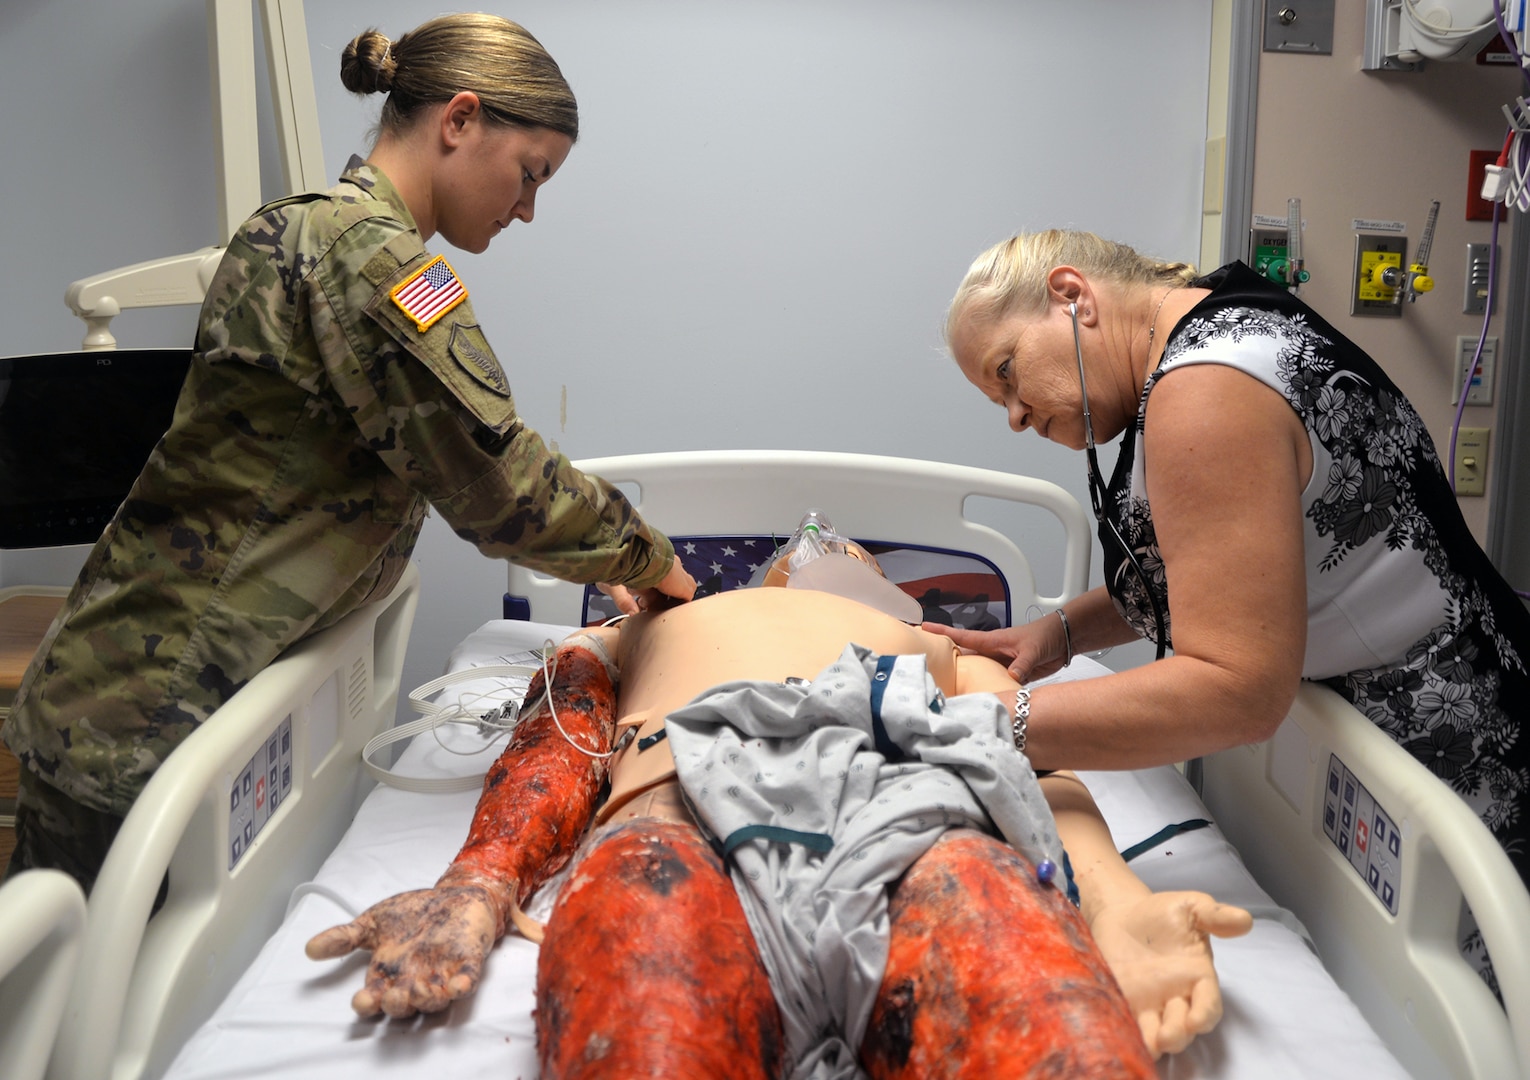 Maj. Allison Ferro, U.S. Army Institute of Surgical Research Burn Center chief of clinical education (left) and Patricia Colston, USAISR Burn Center nurse educator (right) prepare a patient mannequin used for training in the Clinical Pre-Deployment Training Pilot Program. The pilot program gives groups and teams of medical service members who are preparing for deployment the opportunity to train at the USAISR Burn Center, which is the sole facility within the Department of Defense that cares and treats burn patients who are active-duty and injured in combat, military dependents and non-military civilian emergencies.